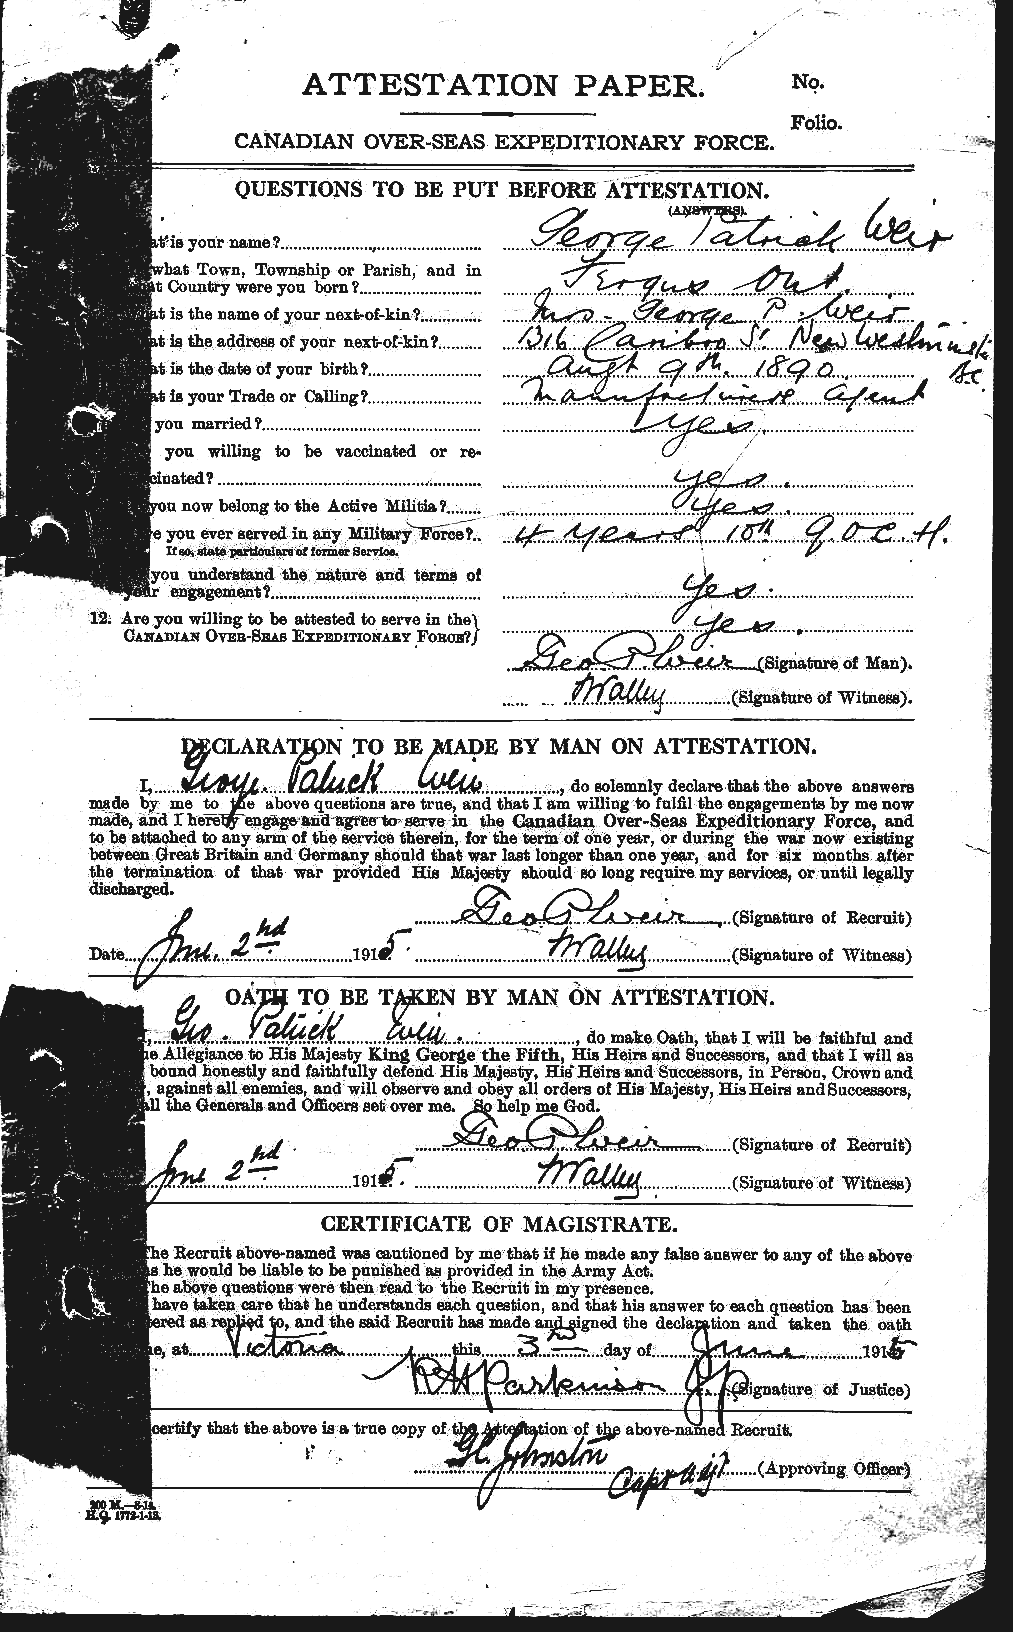 Personnel Records of the First World War - CEF 663818a